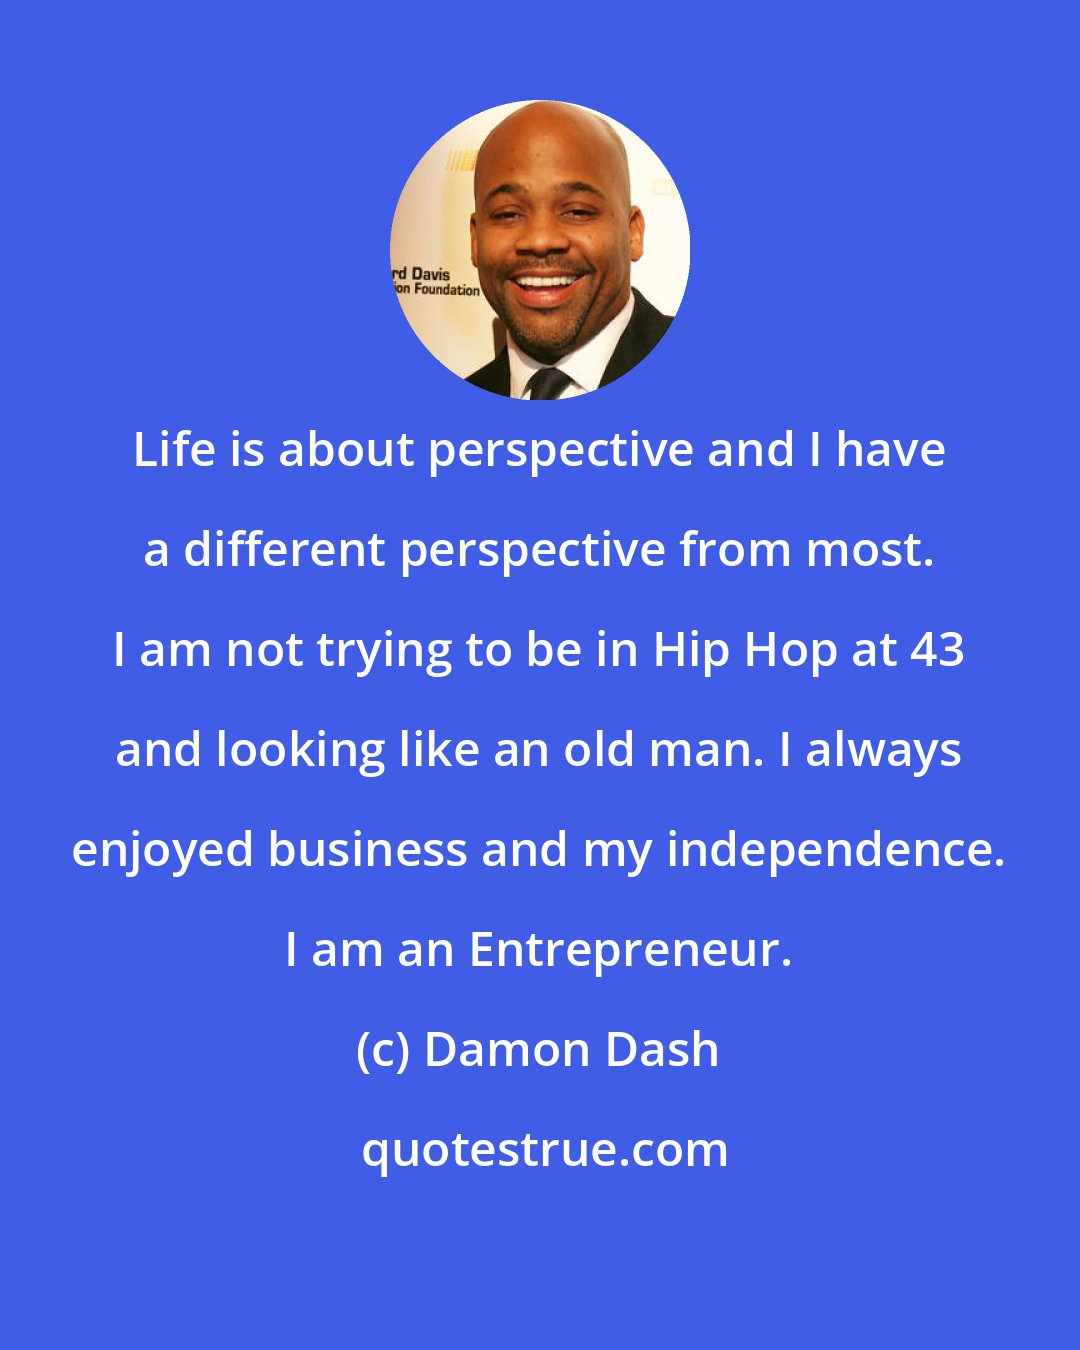 Damon Dash: Life is about perspective and I have a different perspective from most. I am not trying to be in Hip Hop at 43 and looking like an old man. I always enjoyed business and my independence. I am an Entrepreneur.